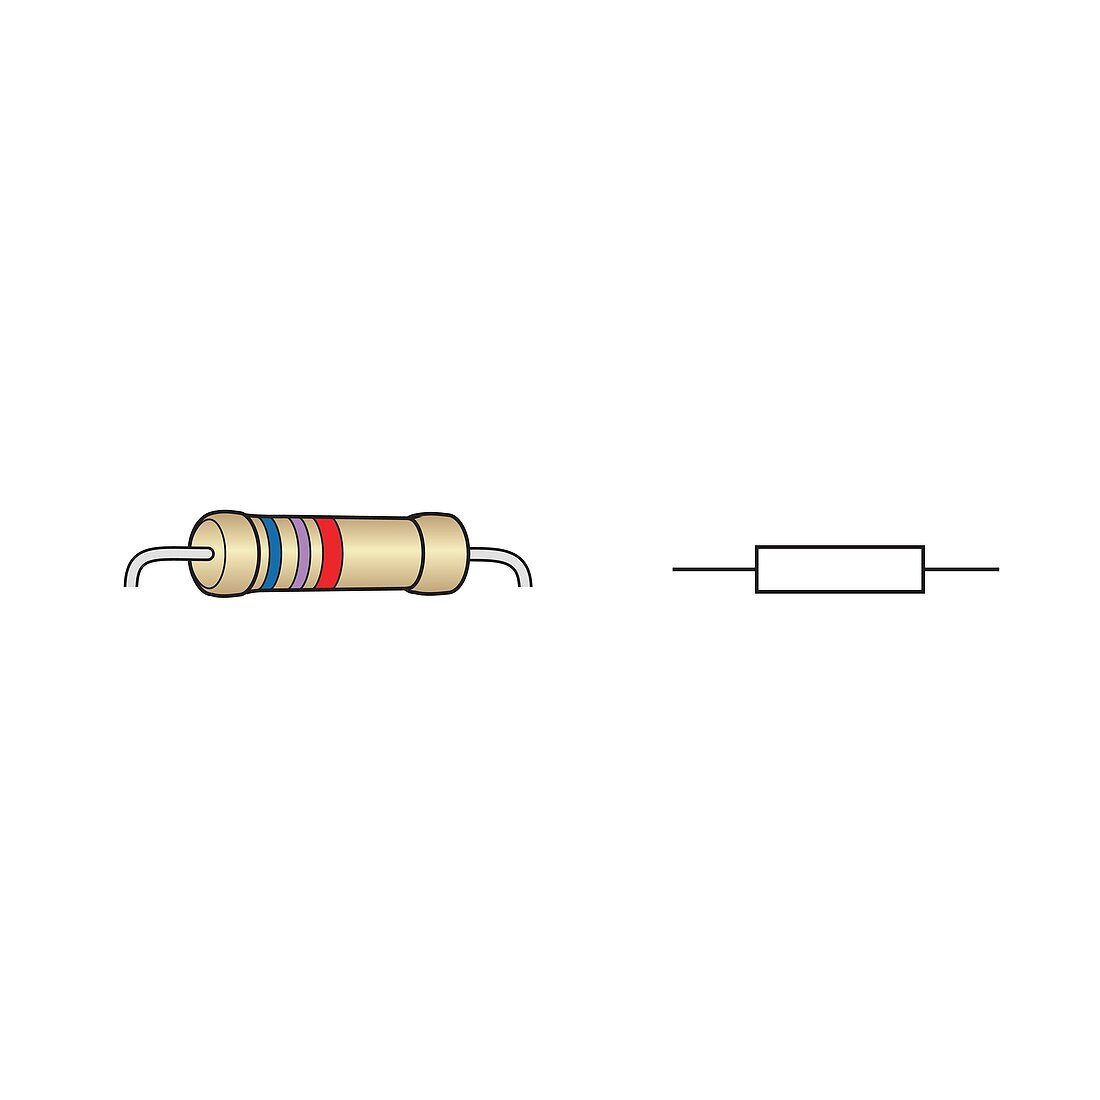 Fixed resistor and circuit symbol, illustration